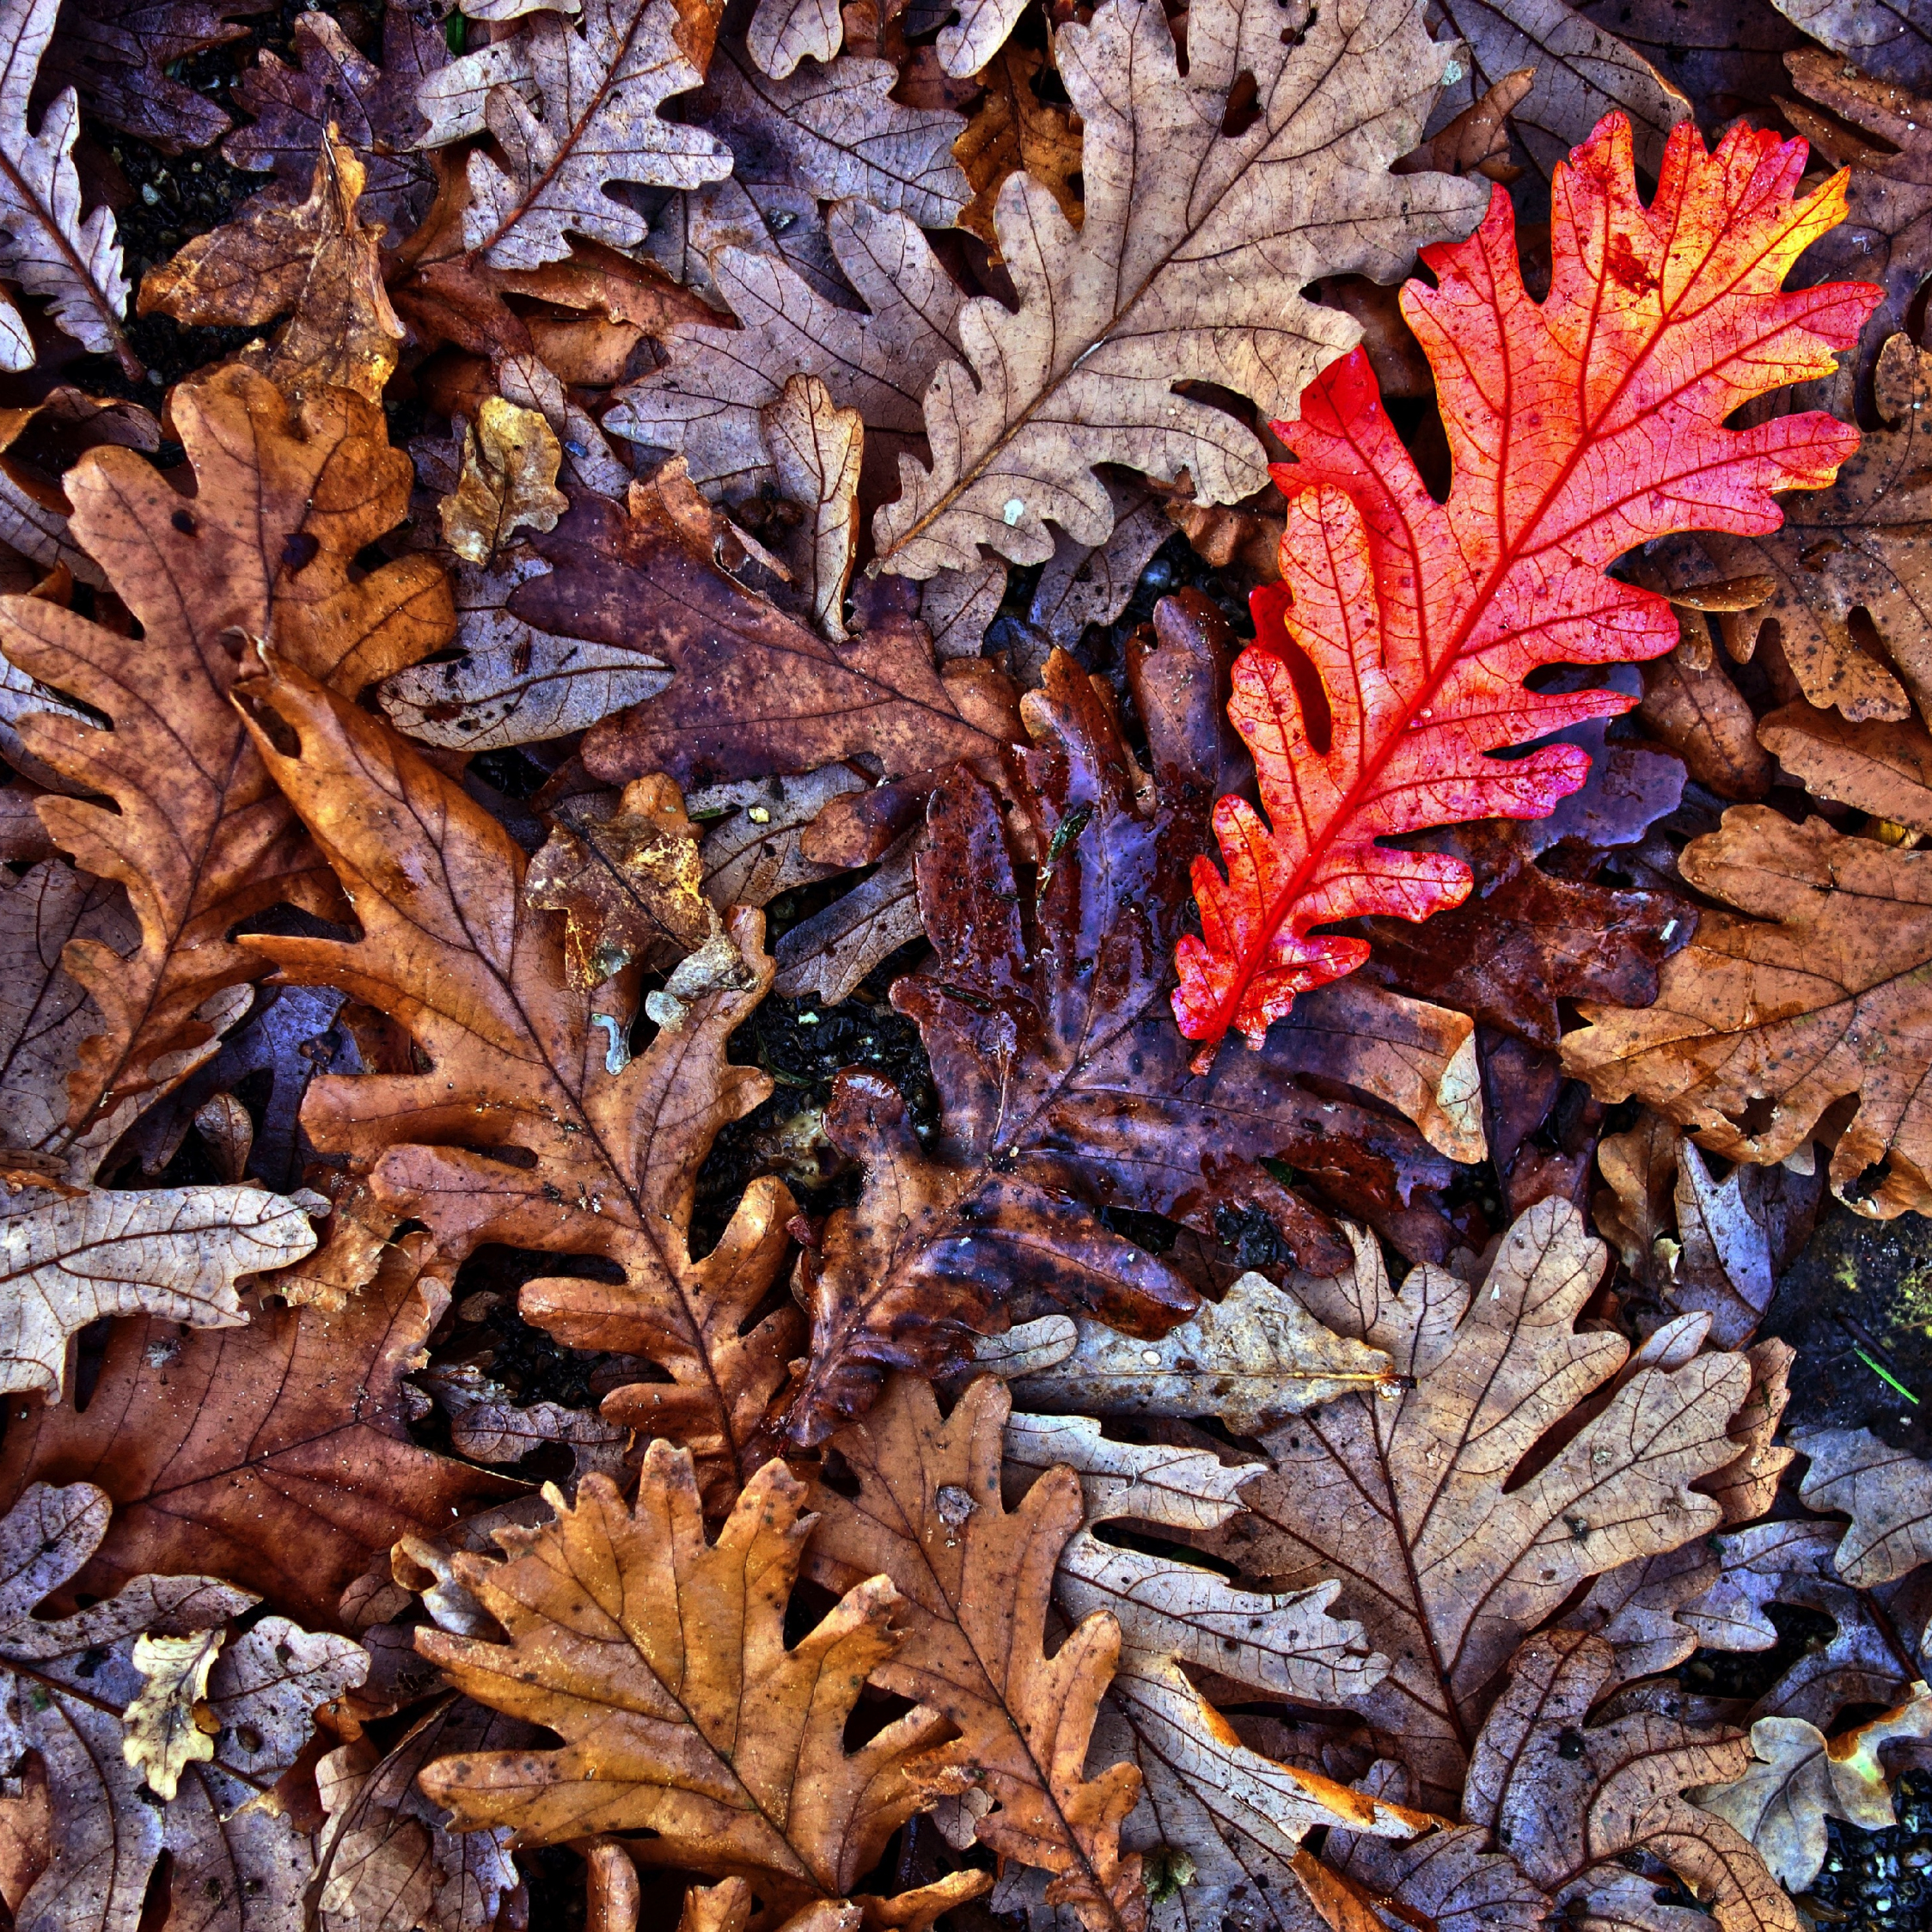 Download oak leaves, autumn, fall 2248x2248 wallpaper, ipad air, ipad air ipad ipad ipad mini ipad mini 2248x2248 HD image, background, 681